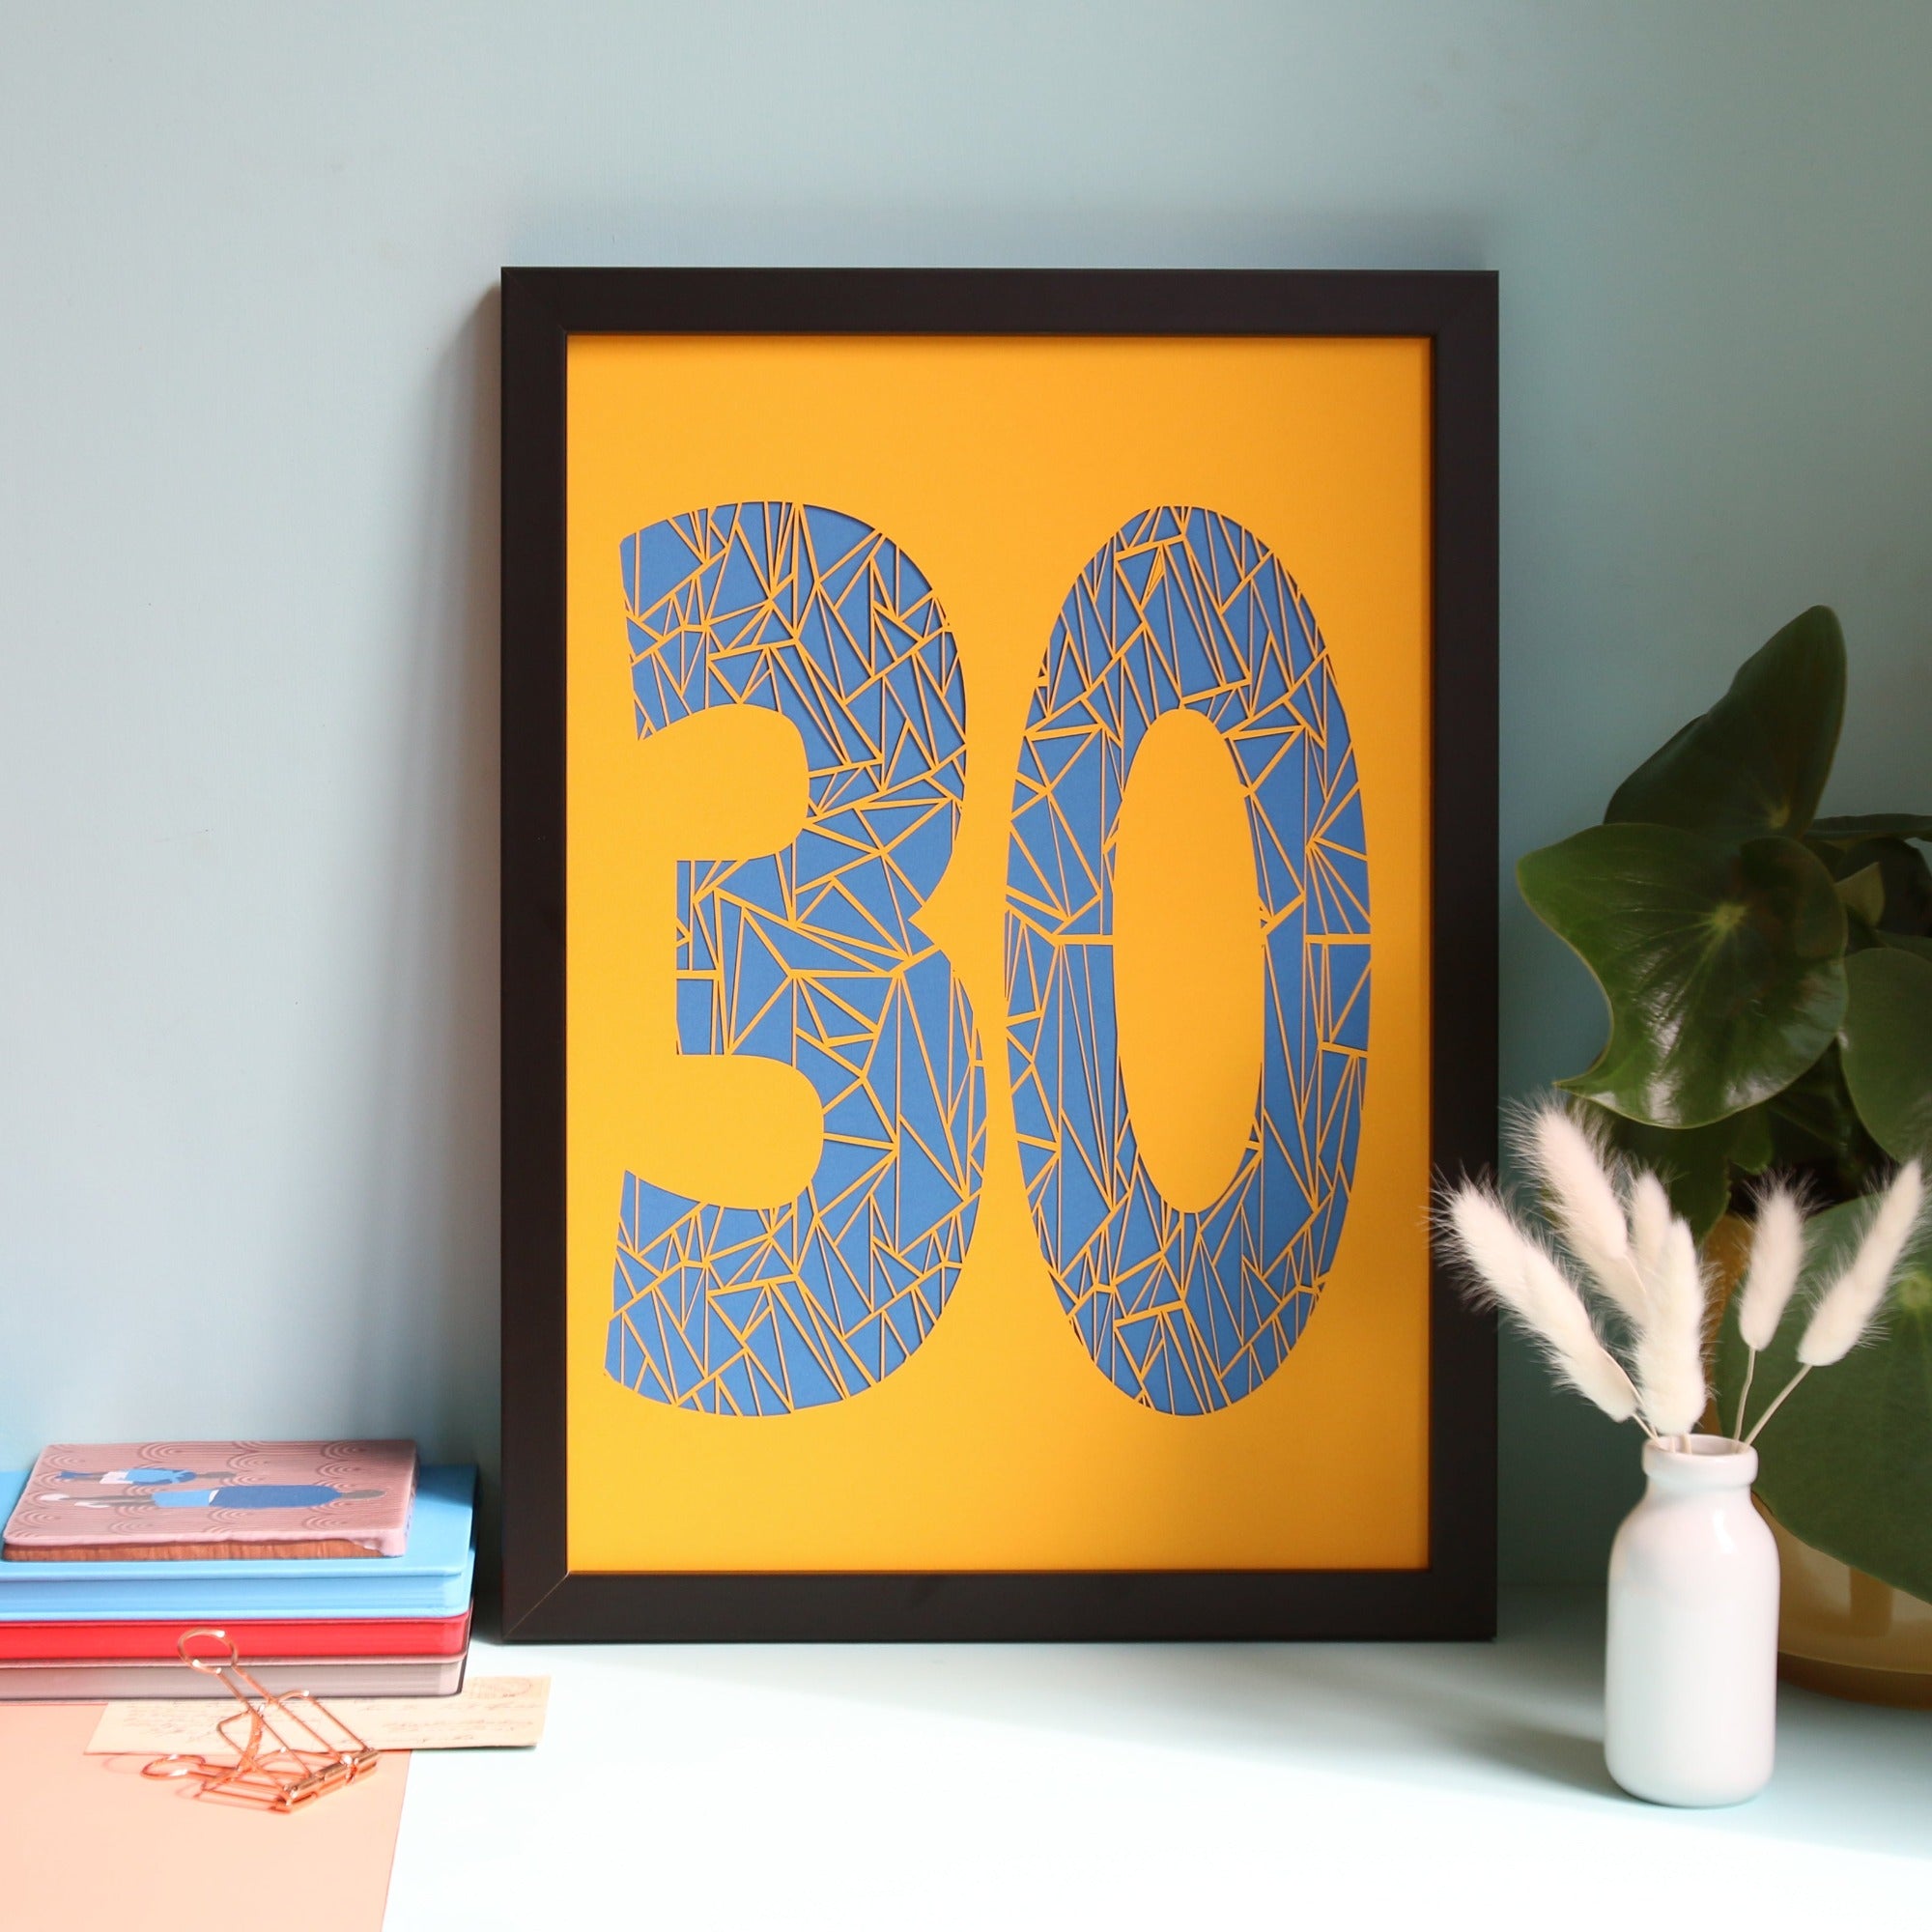 Framed geometric number 30 papercut in yellow and blue colourways